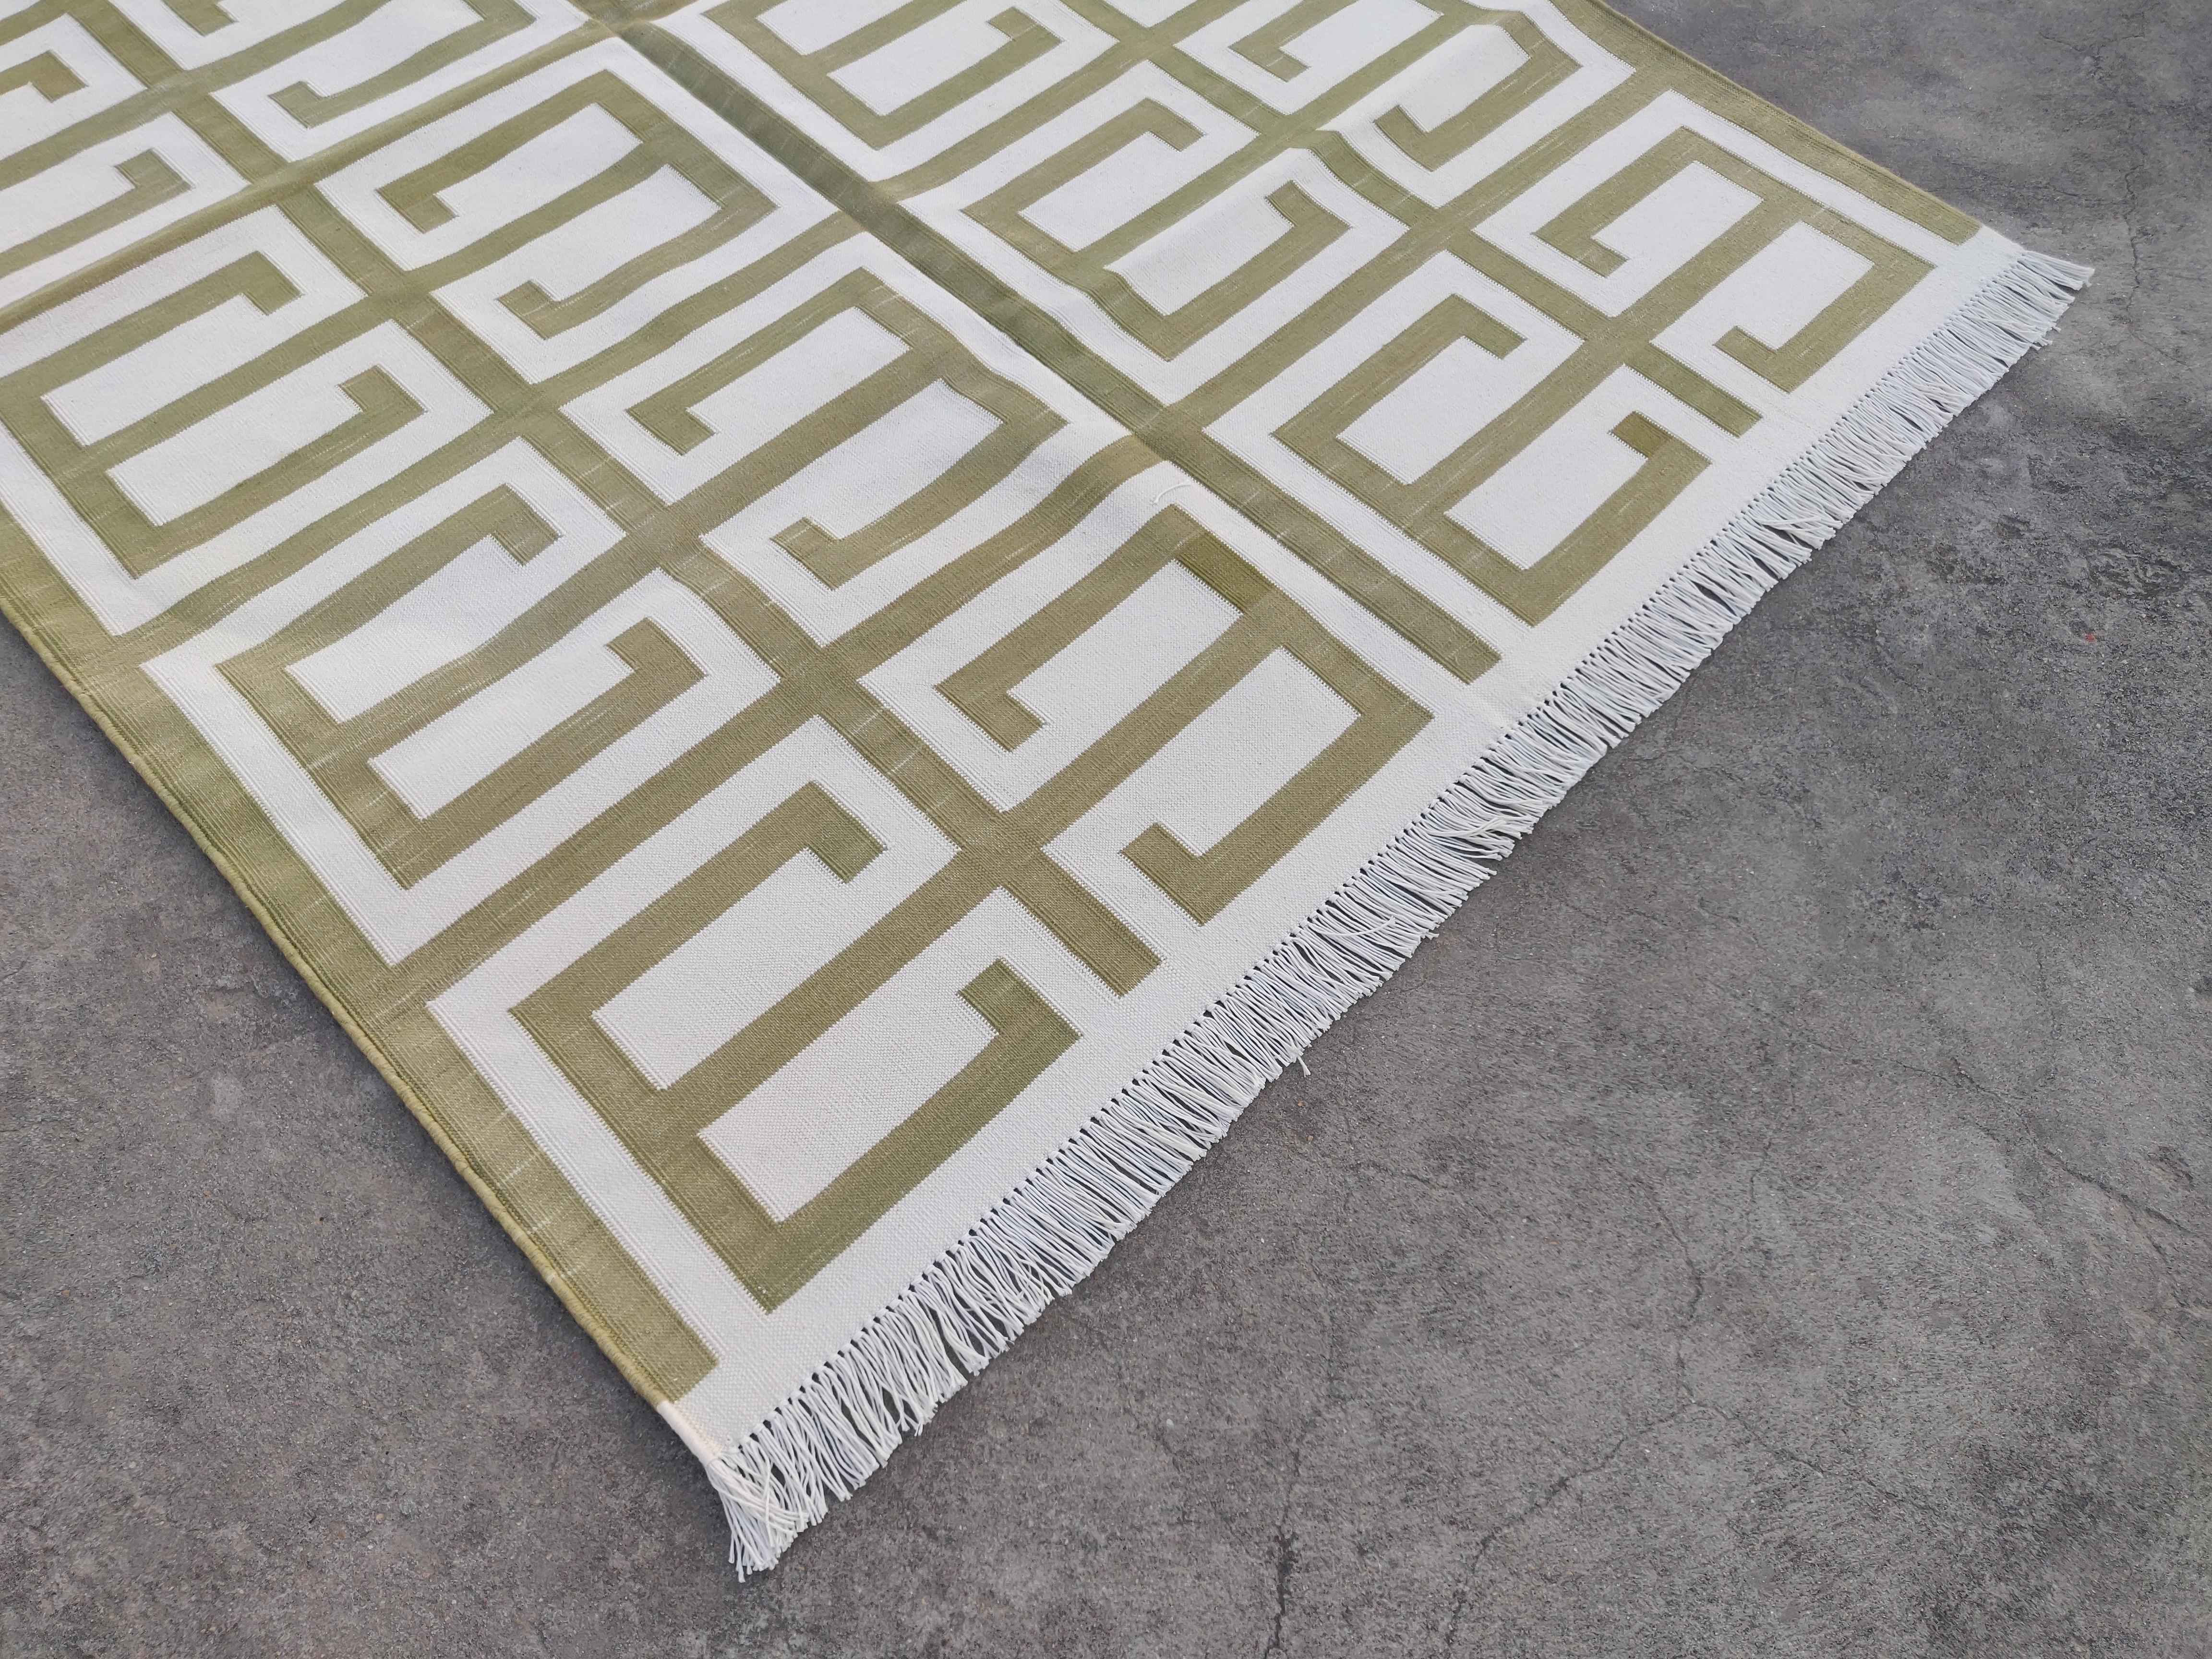 Hand-Woven Handmade Cotton Area Flat Weave Rug, 4x6 Green & White Geometric Indian Dhurrie For Sale